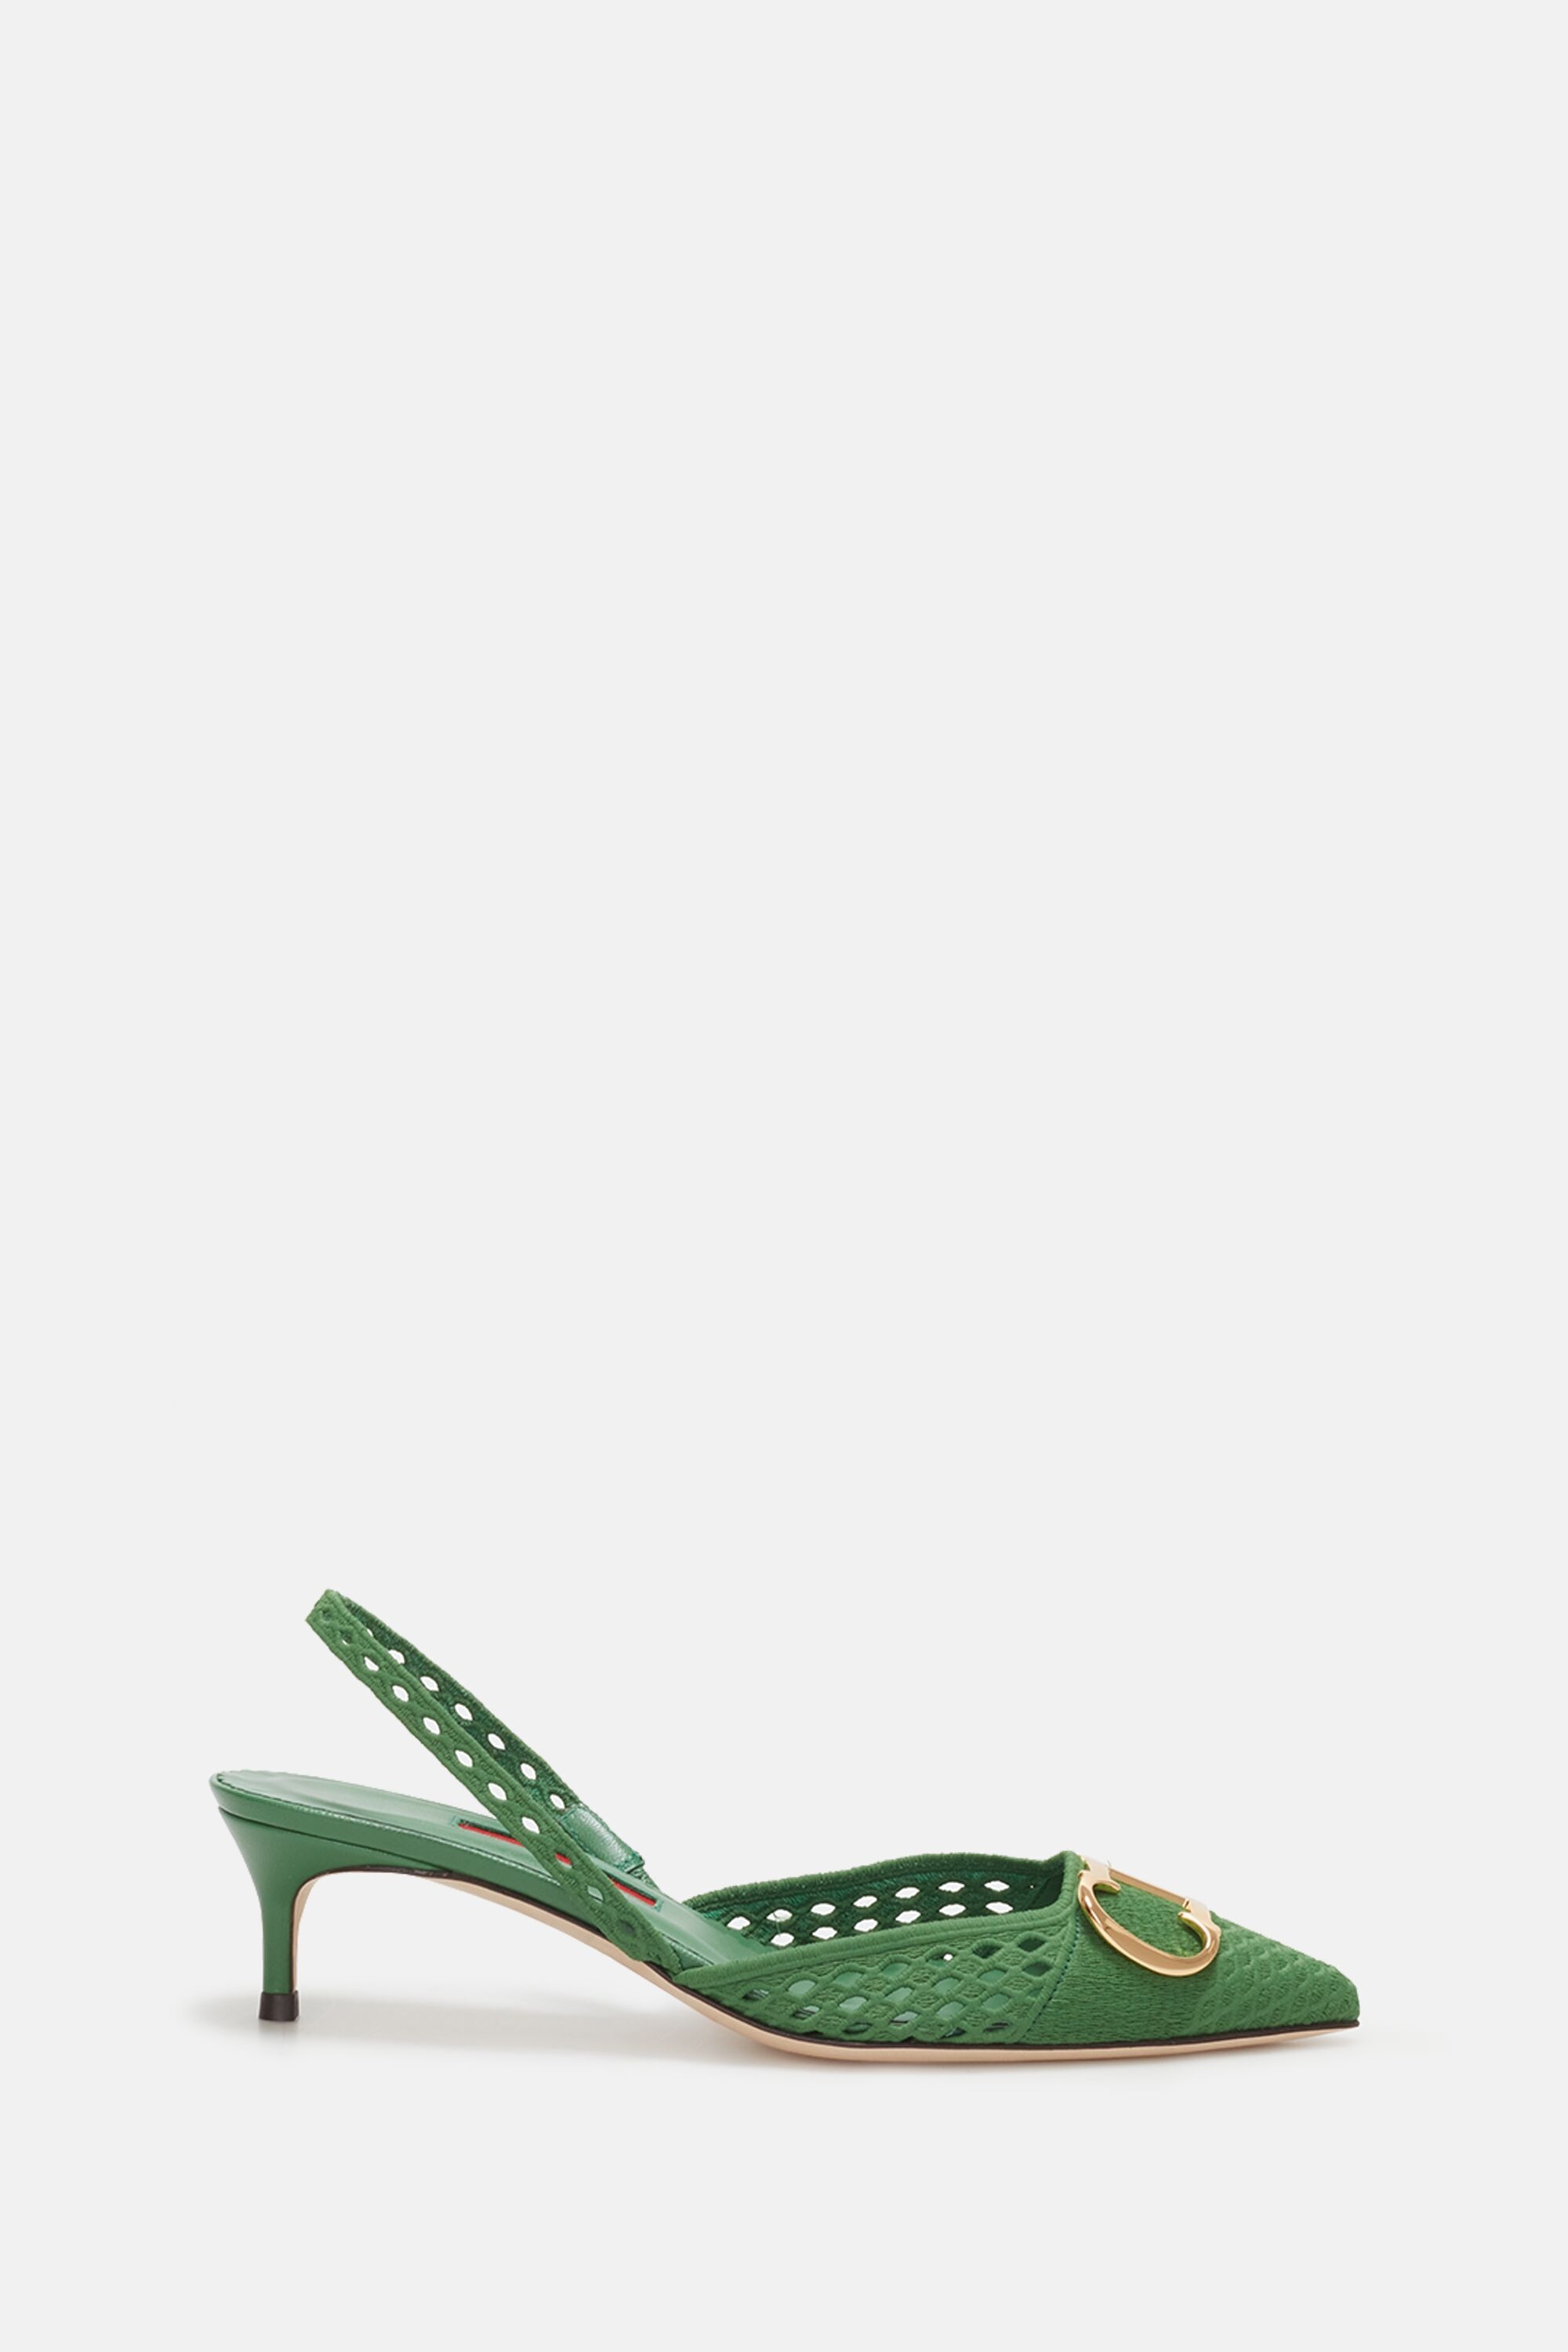 Initials Insignia 45 embroidered slingback pumps